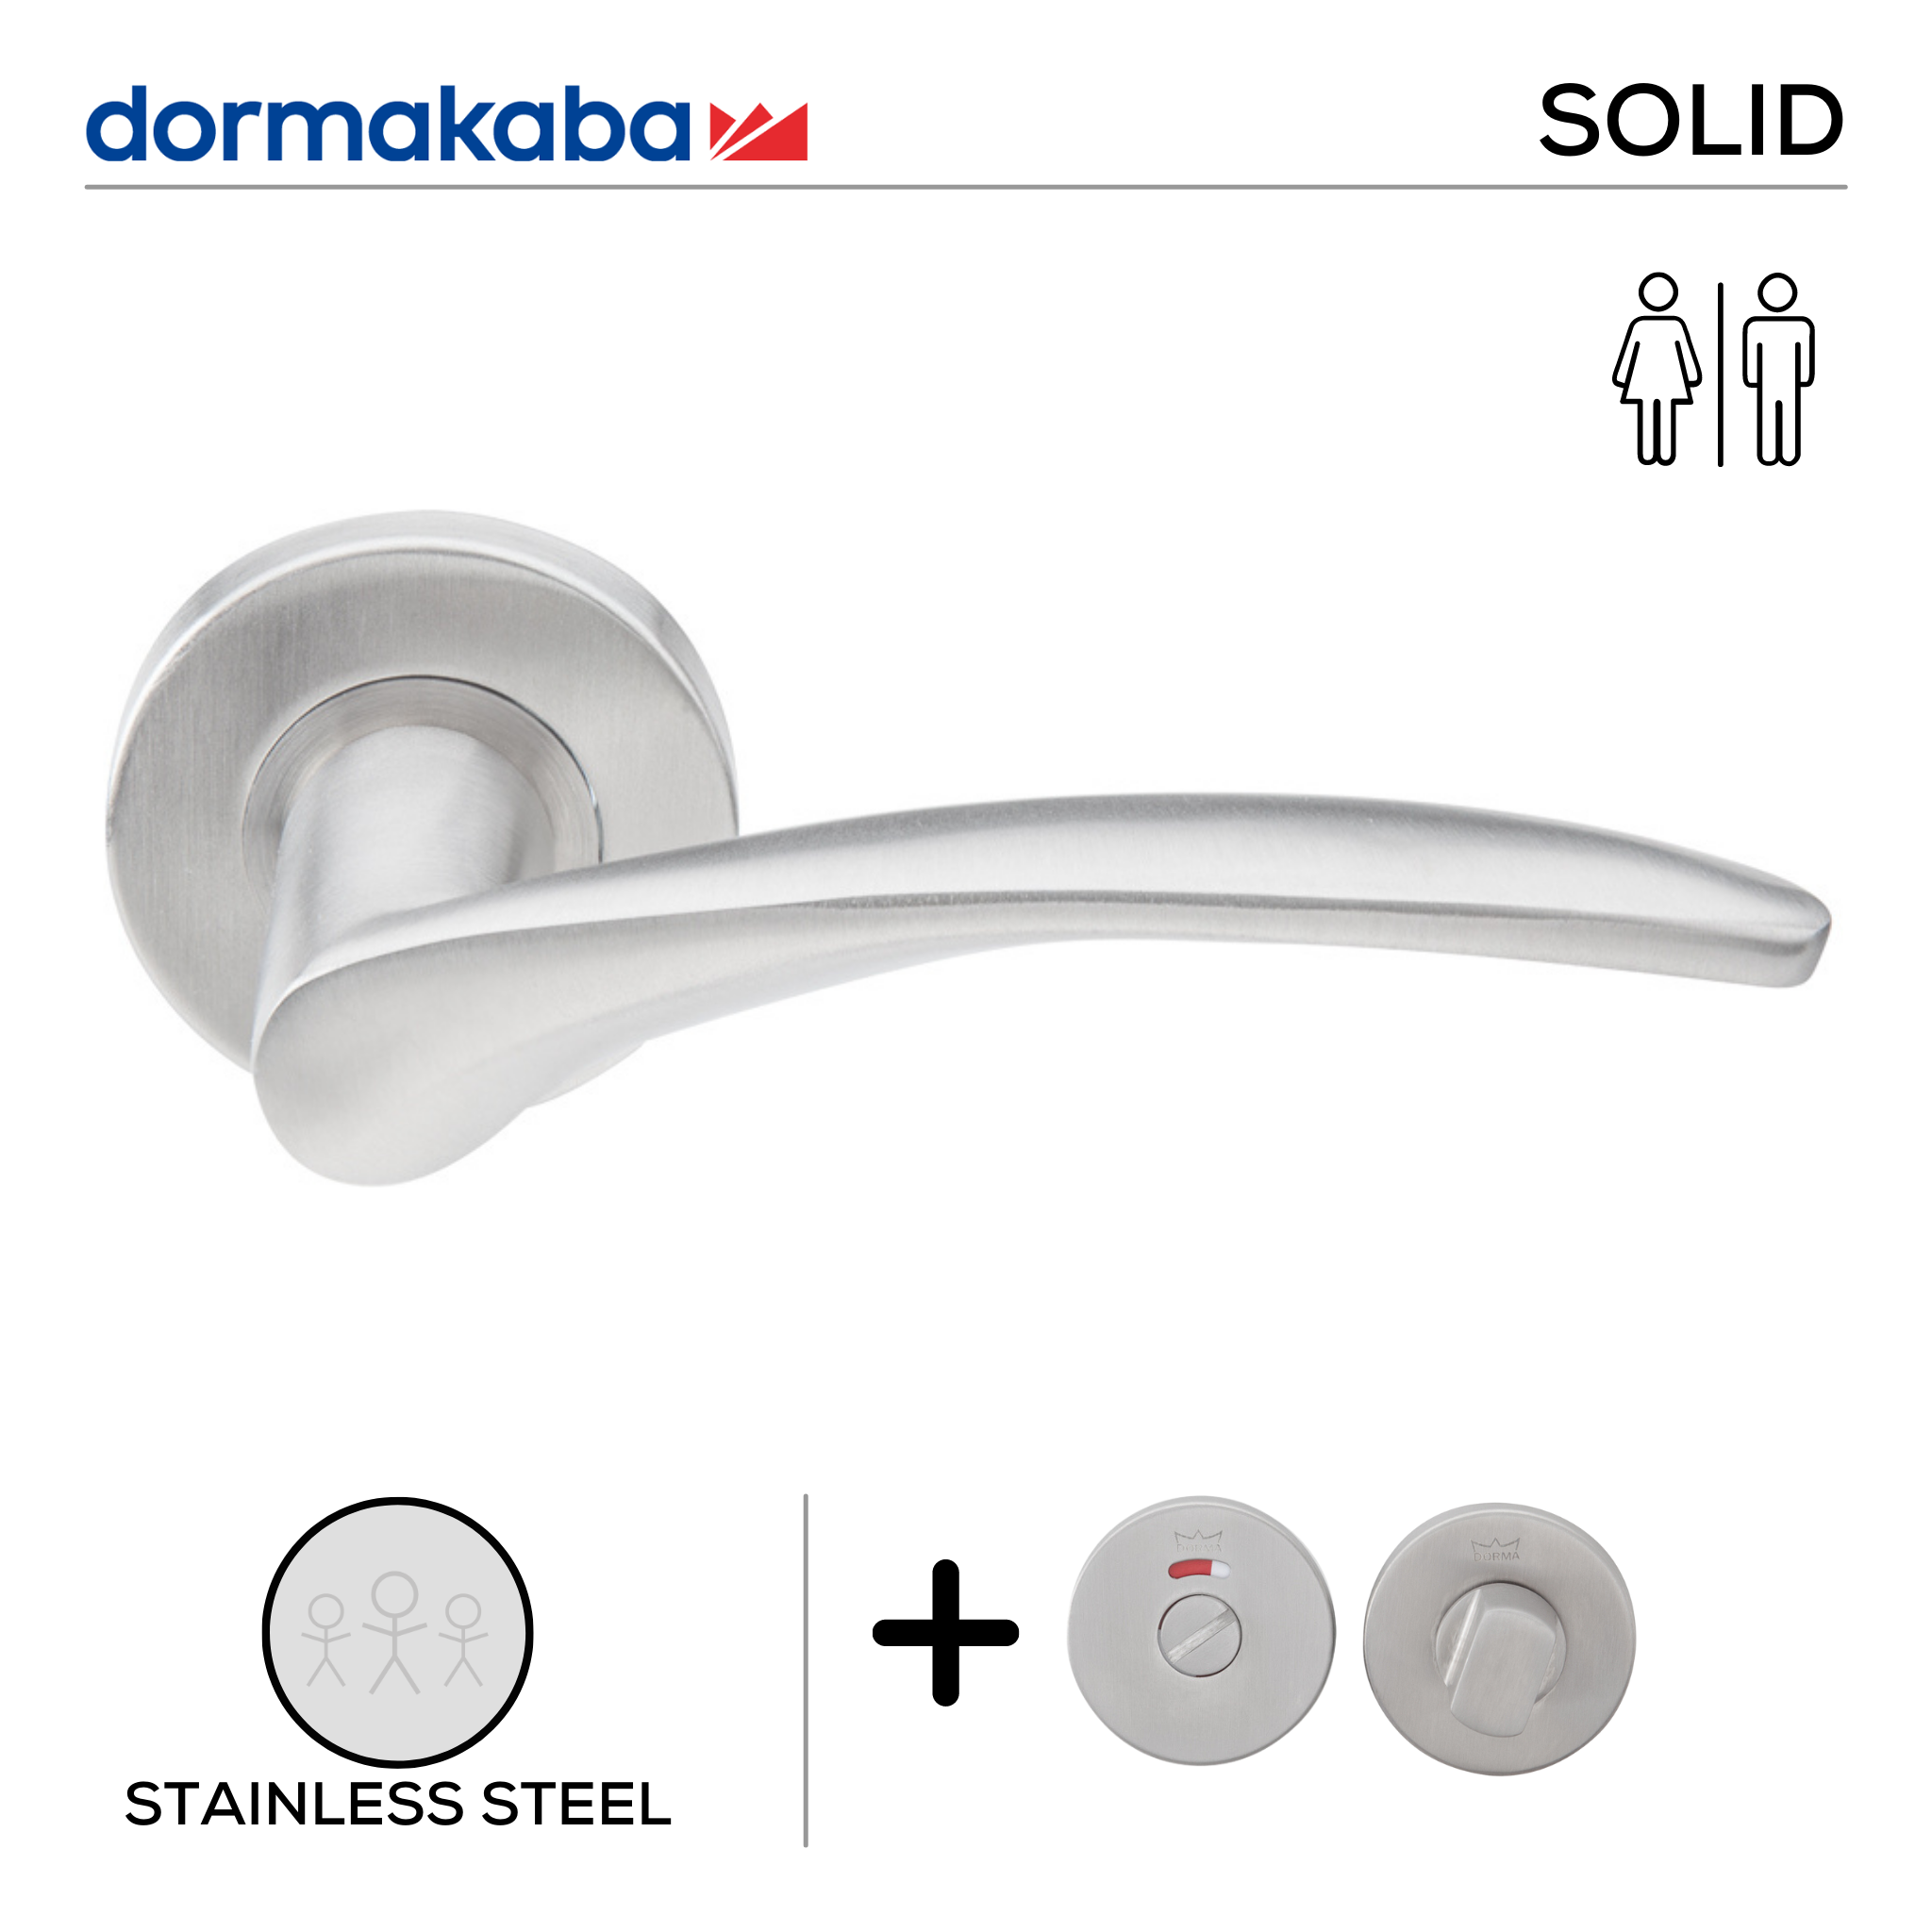 SH 822 Bathroom W/C, Lever Handles, Solid, On Round Rose, With Bathroom (WC) Indicator Set - DWC 005, 135mm (l), Stainless Steel, DORMAKABA